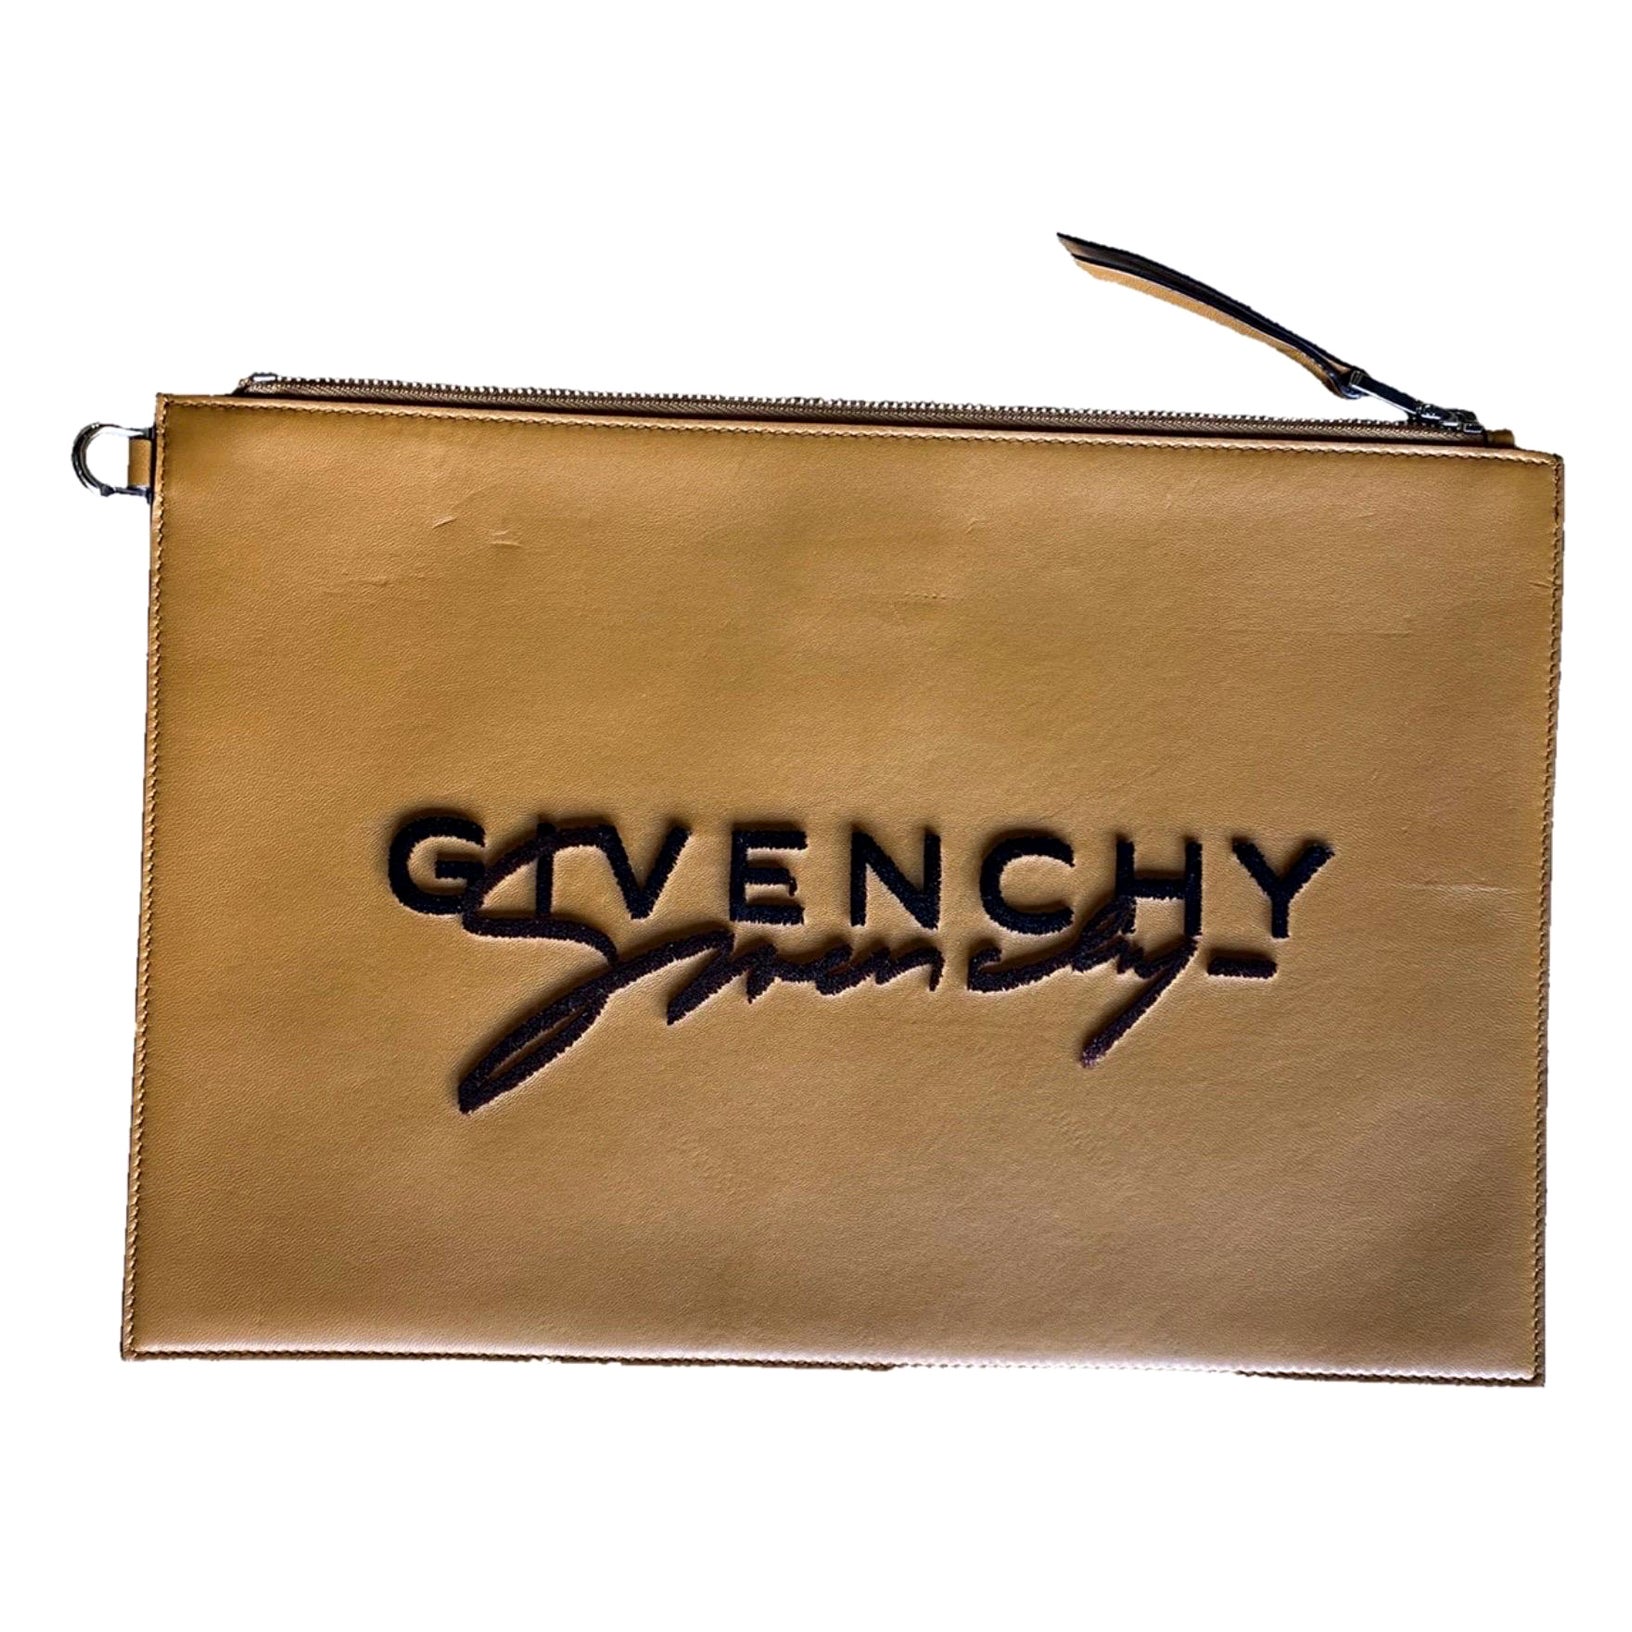 Givenchy golden brown leather Clutch Bag For Sale